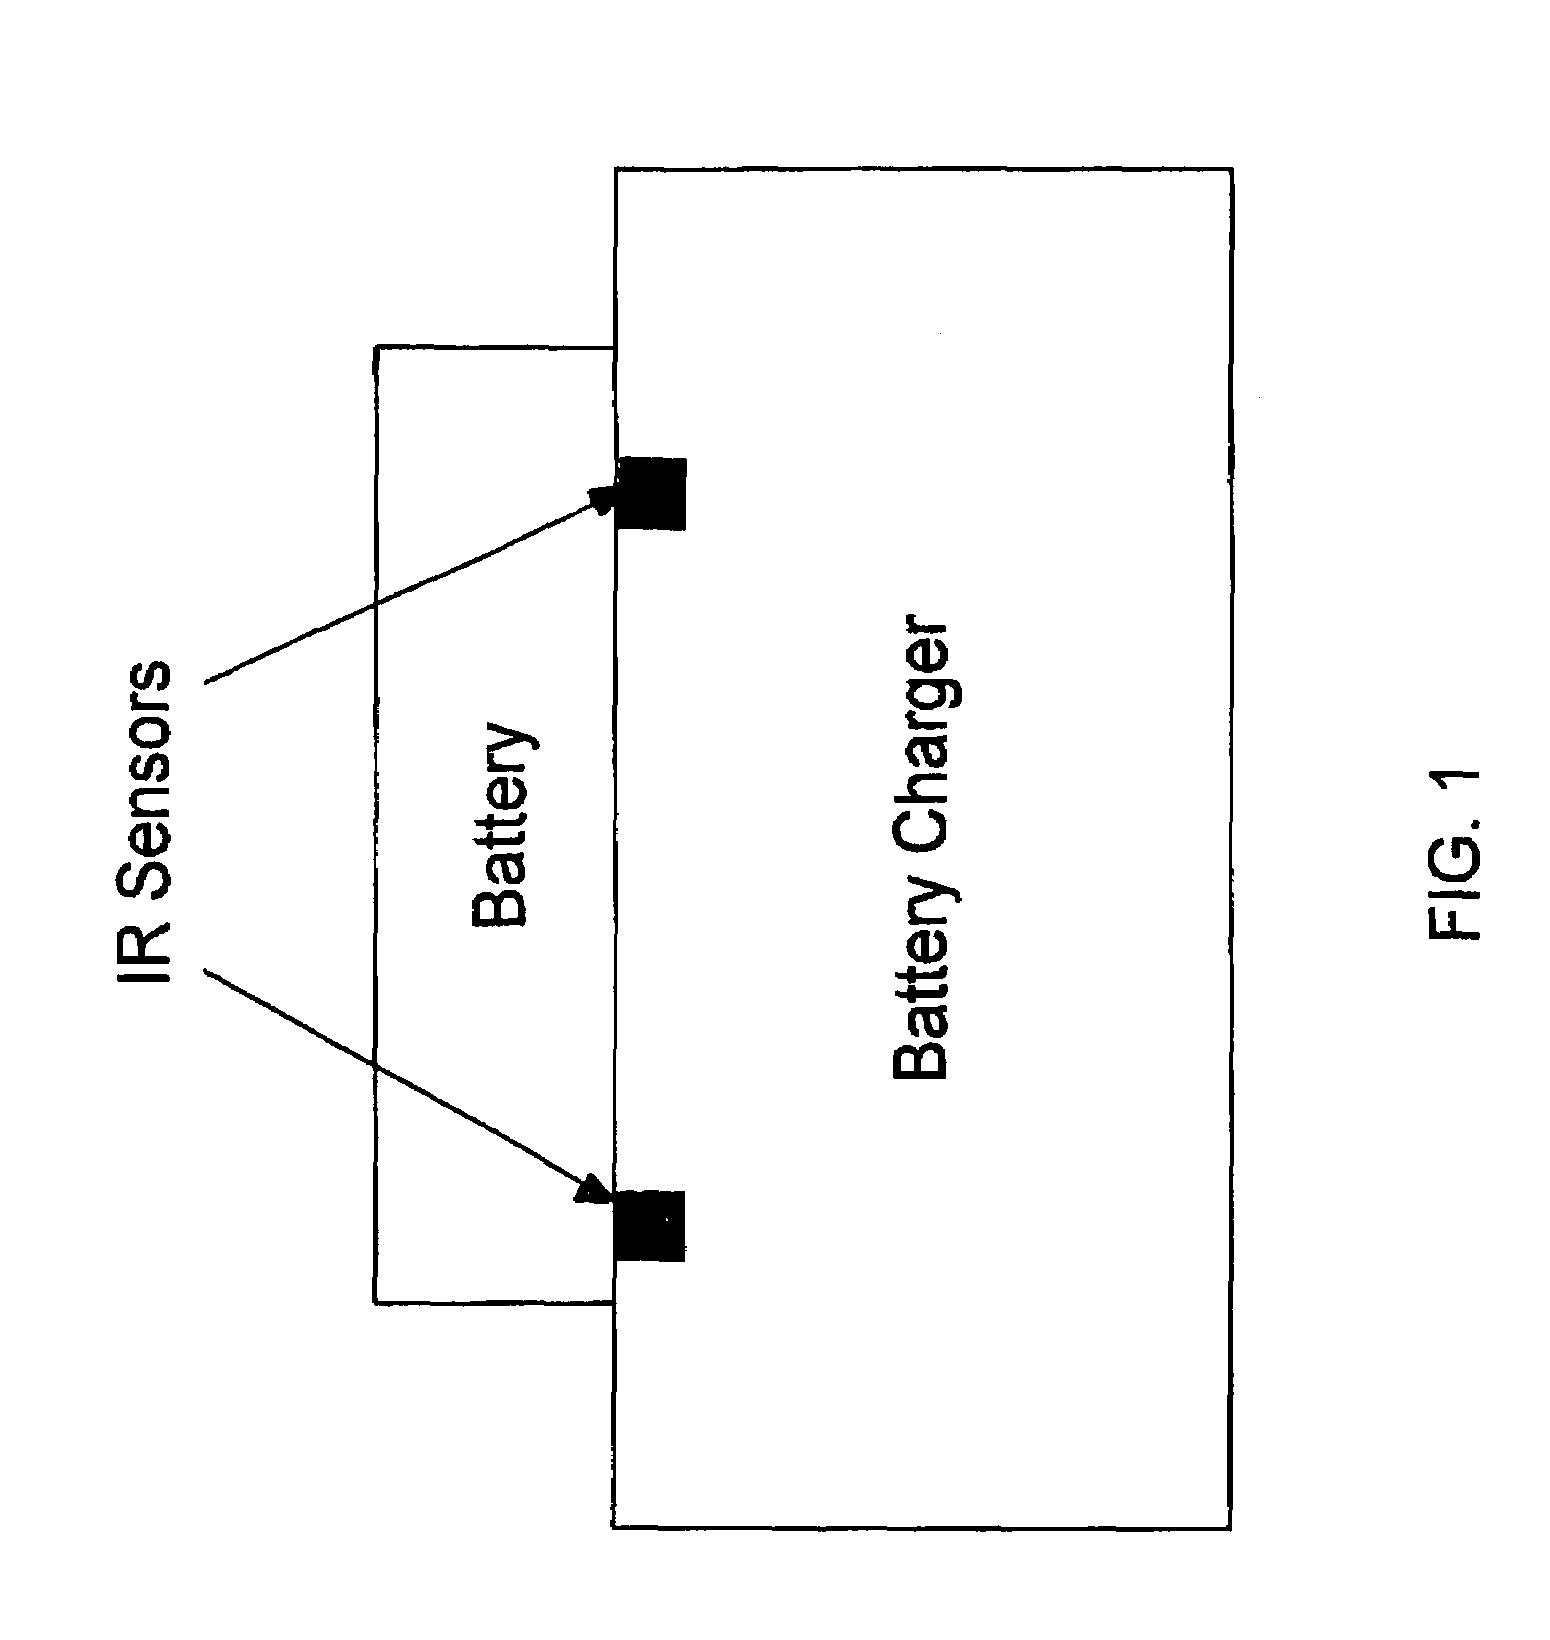 Method and apparatus for acquiring battery temperature measurements using stereographic or single sensor thermal imaging